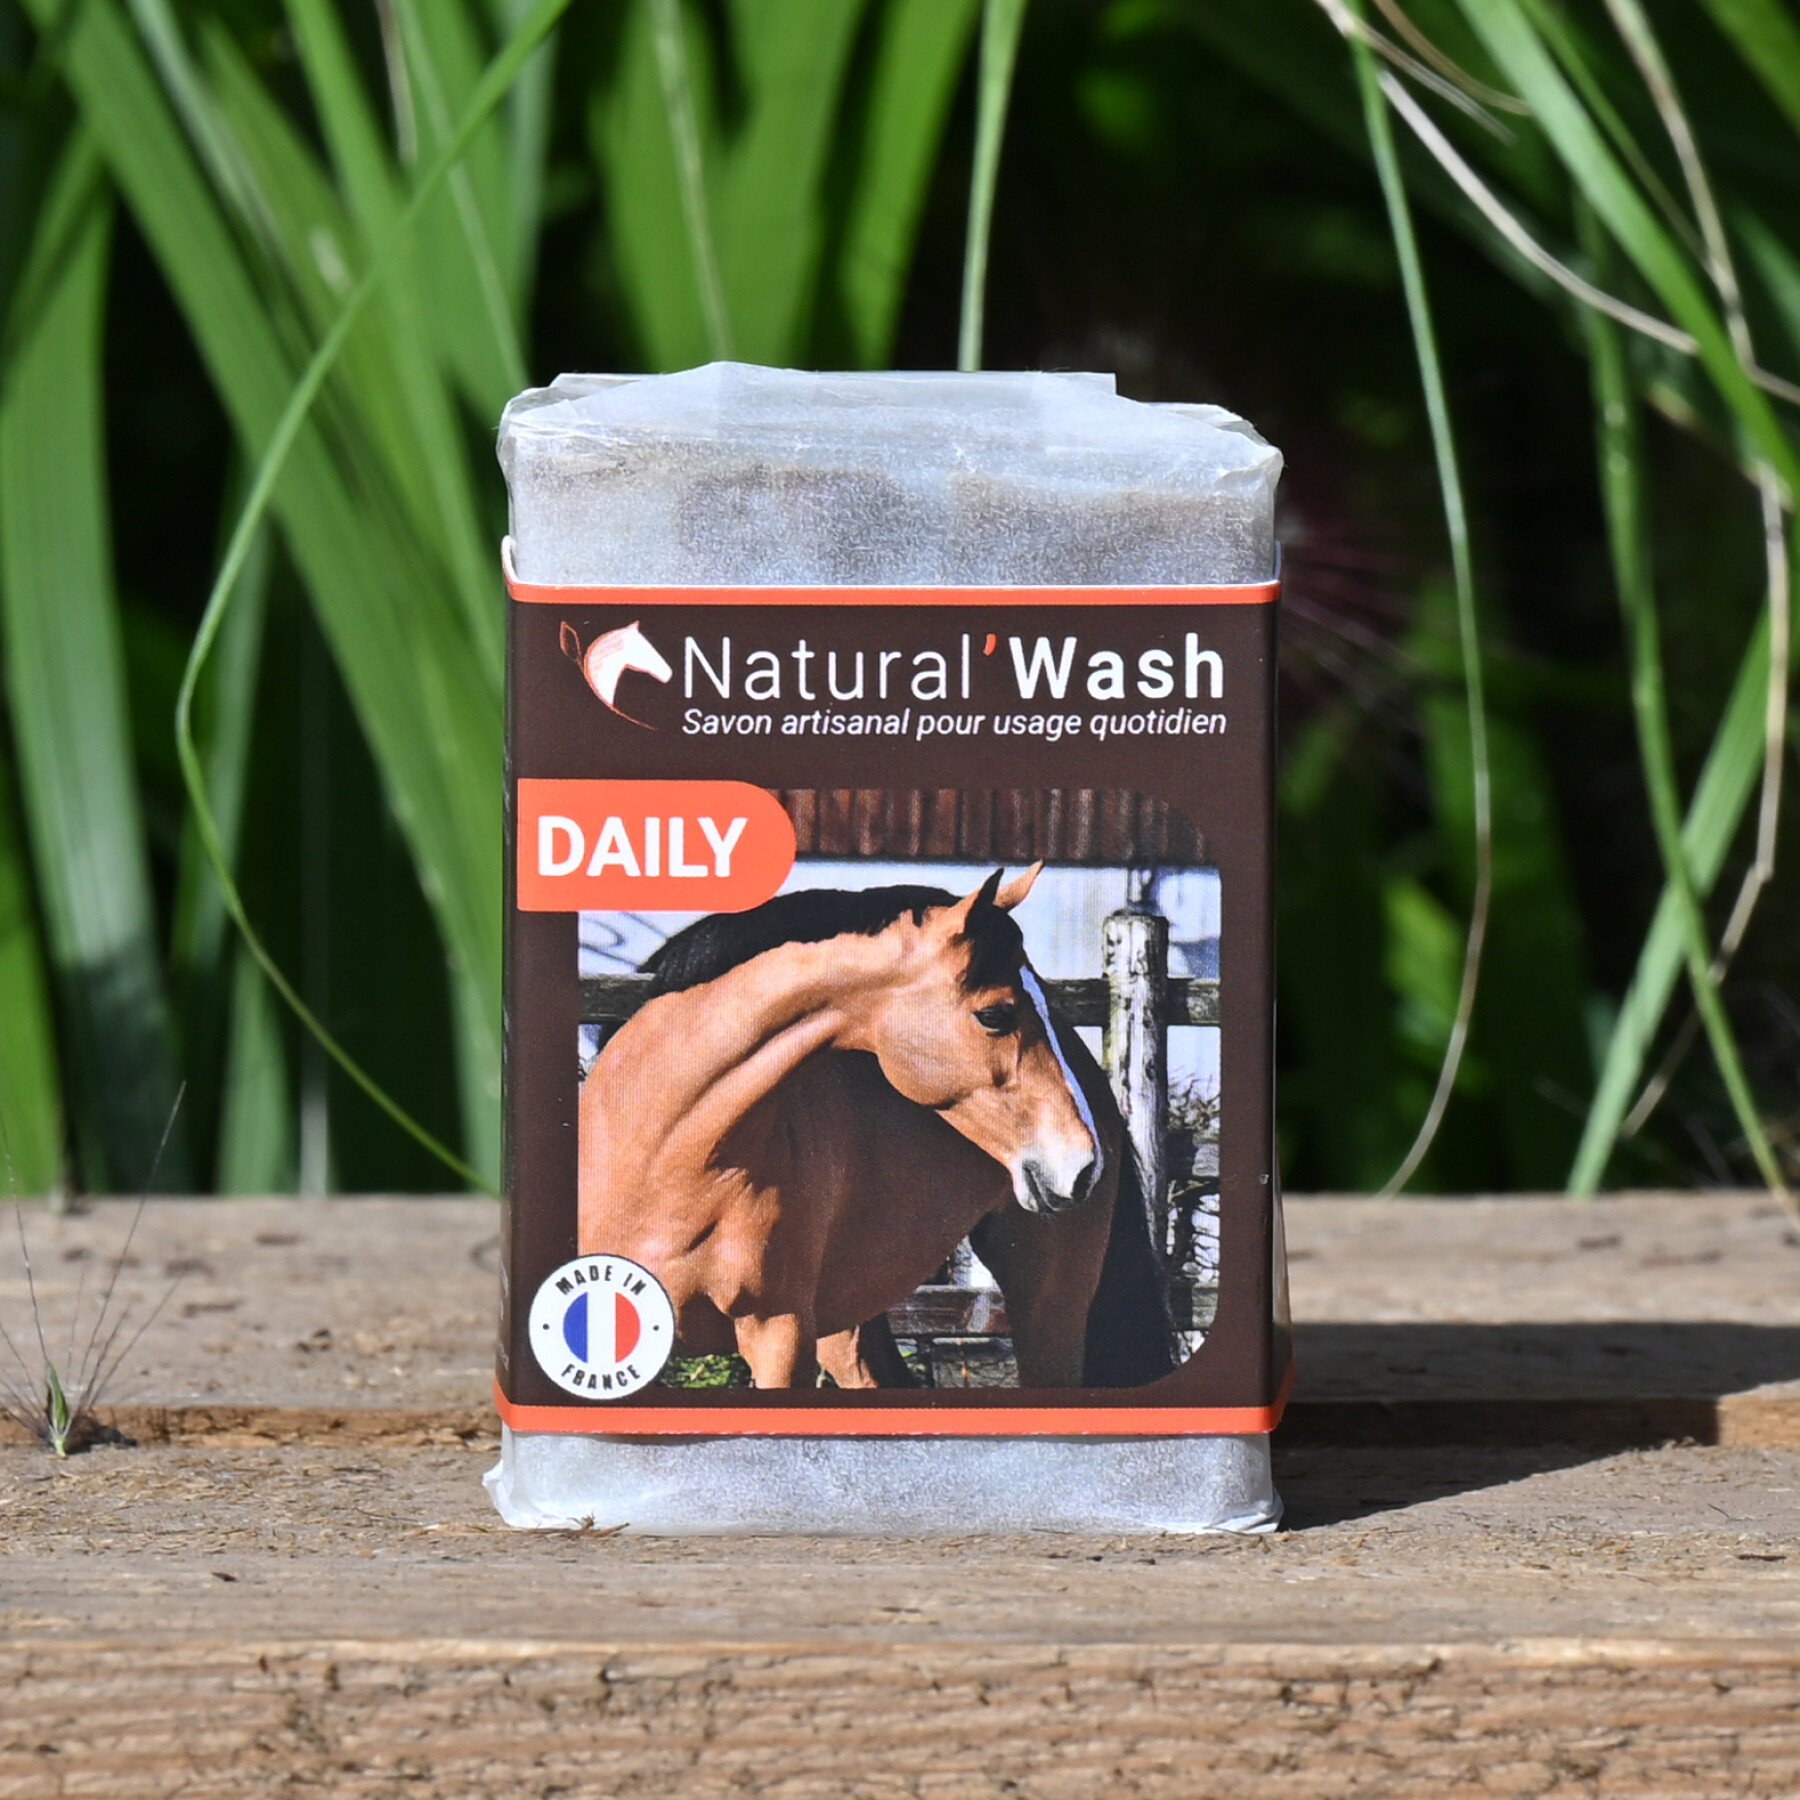 Shampoing solide pour cheval Natural Innov Wash Daily